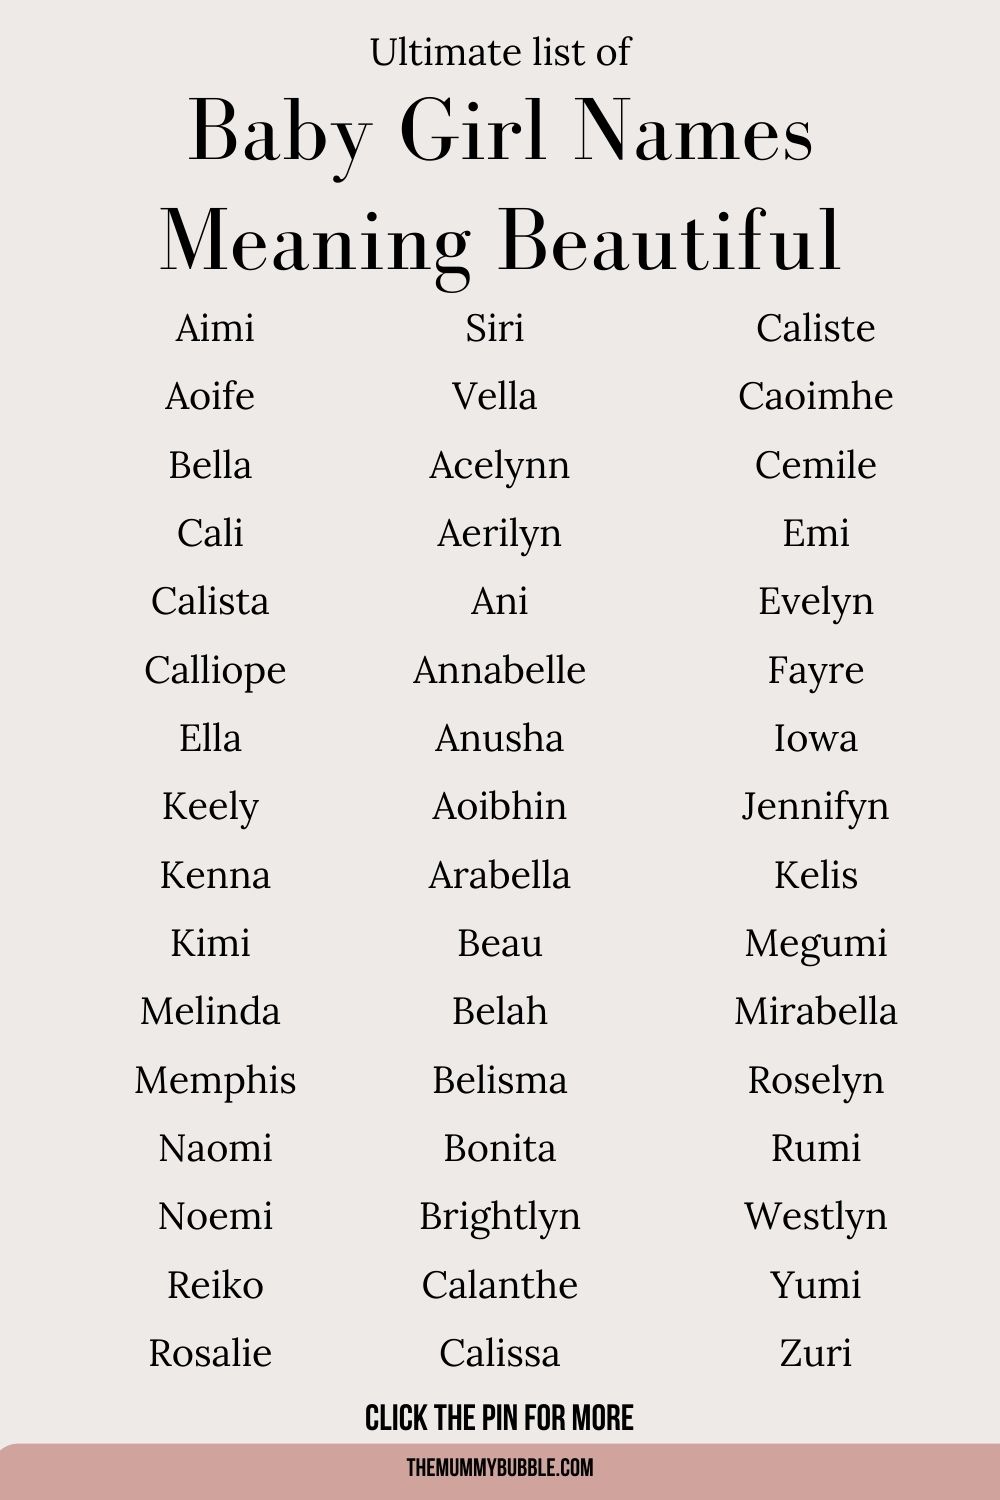 Stunning Baby Girl Names Meaning Beautiful - The Mummy Bubble